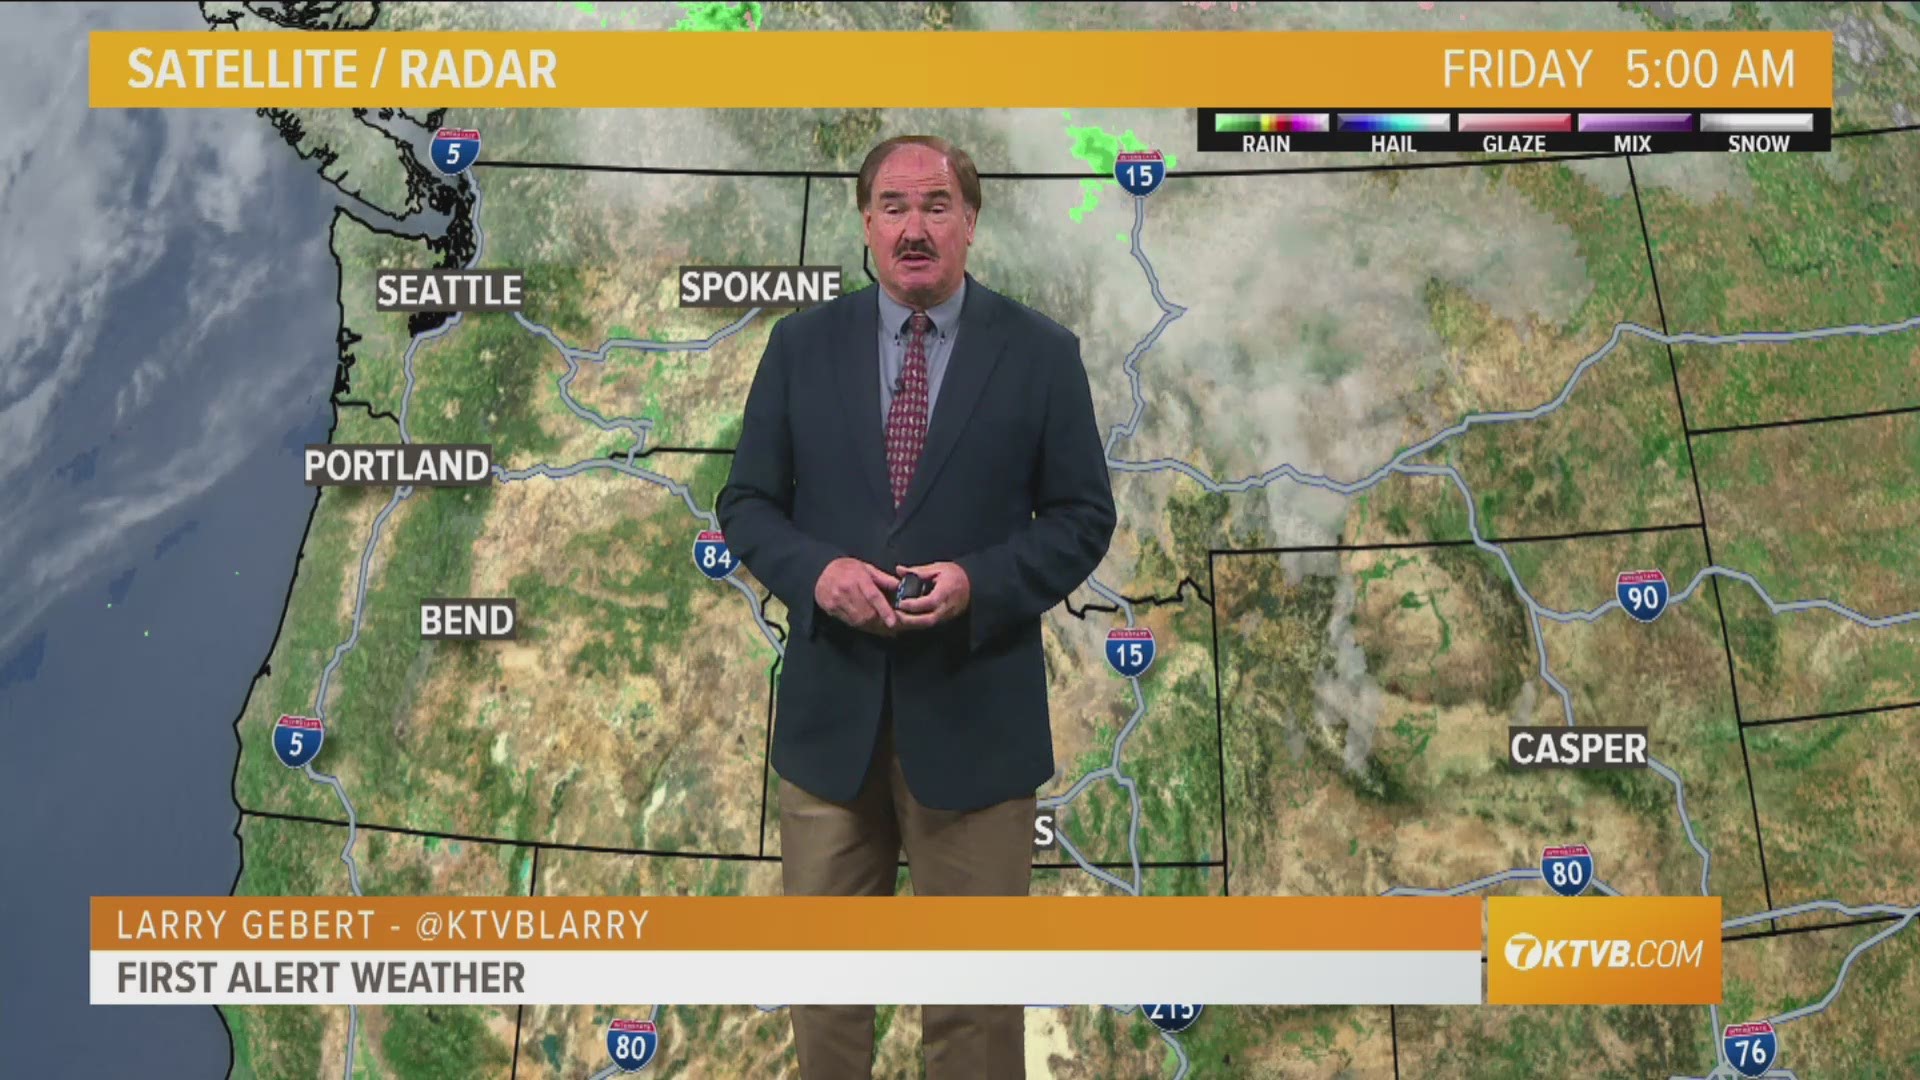 Larry Gebert says the inversion is staying with us. Temps remain above normal.